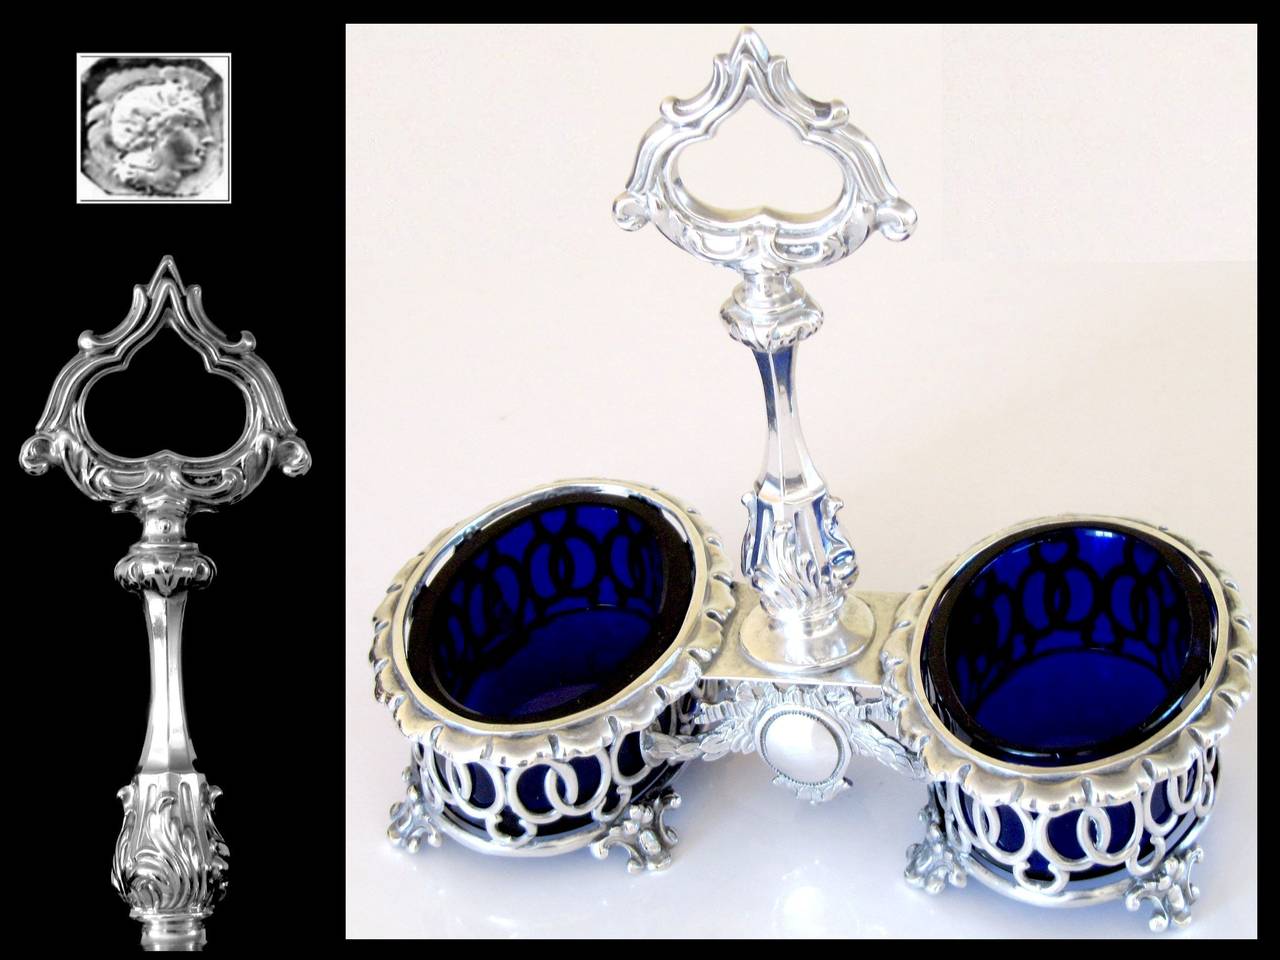 DEBAIN Top Quality French Sterling Silver & Cobalt Glass Open Salt Caddy

Head of Minerve 1st titre on the caddy for 950/1000 French Sterling Silver guarantee.

Exceptional Antique French sterling silver Open Salt Caddy with original Cobalt